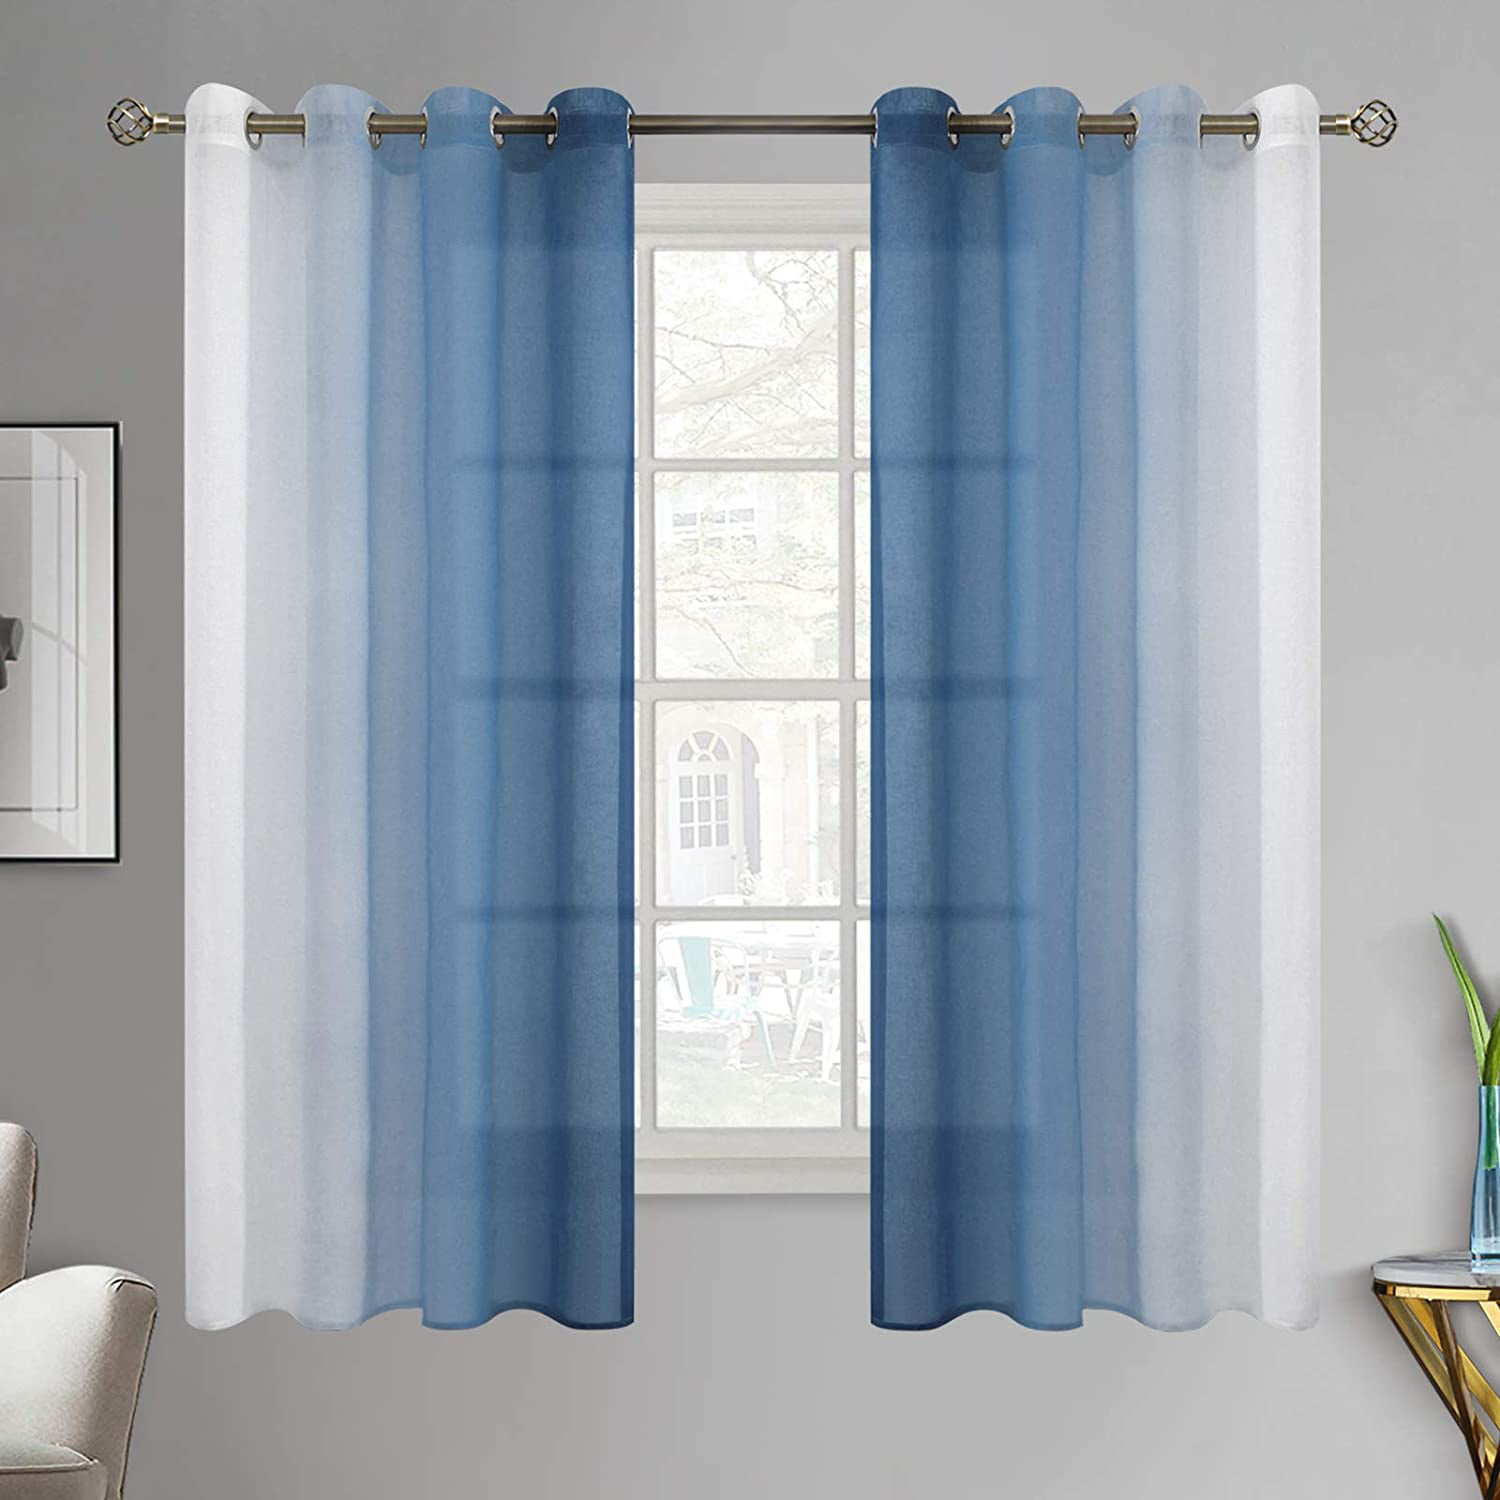 2 Panels Light Filtering Semi Sheer Linen Texture Window Curtains with Grommets 